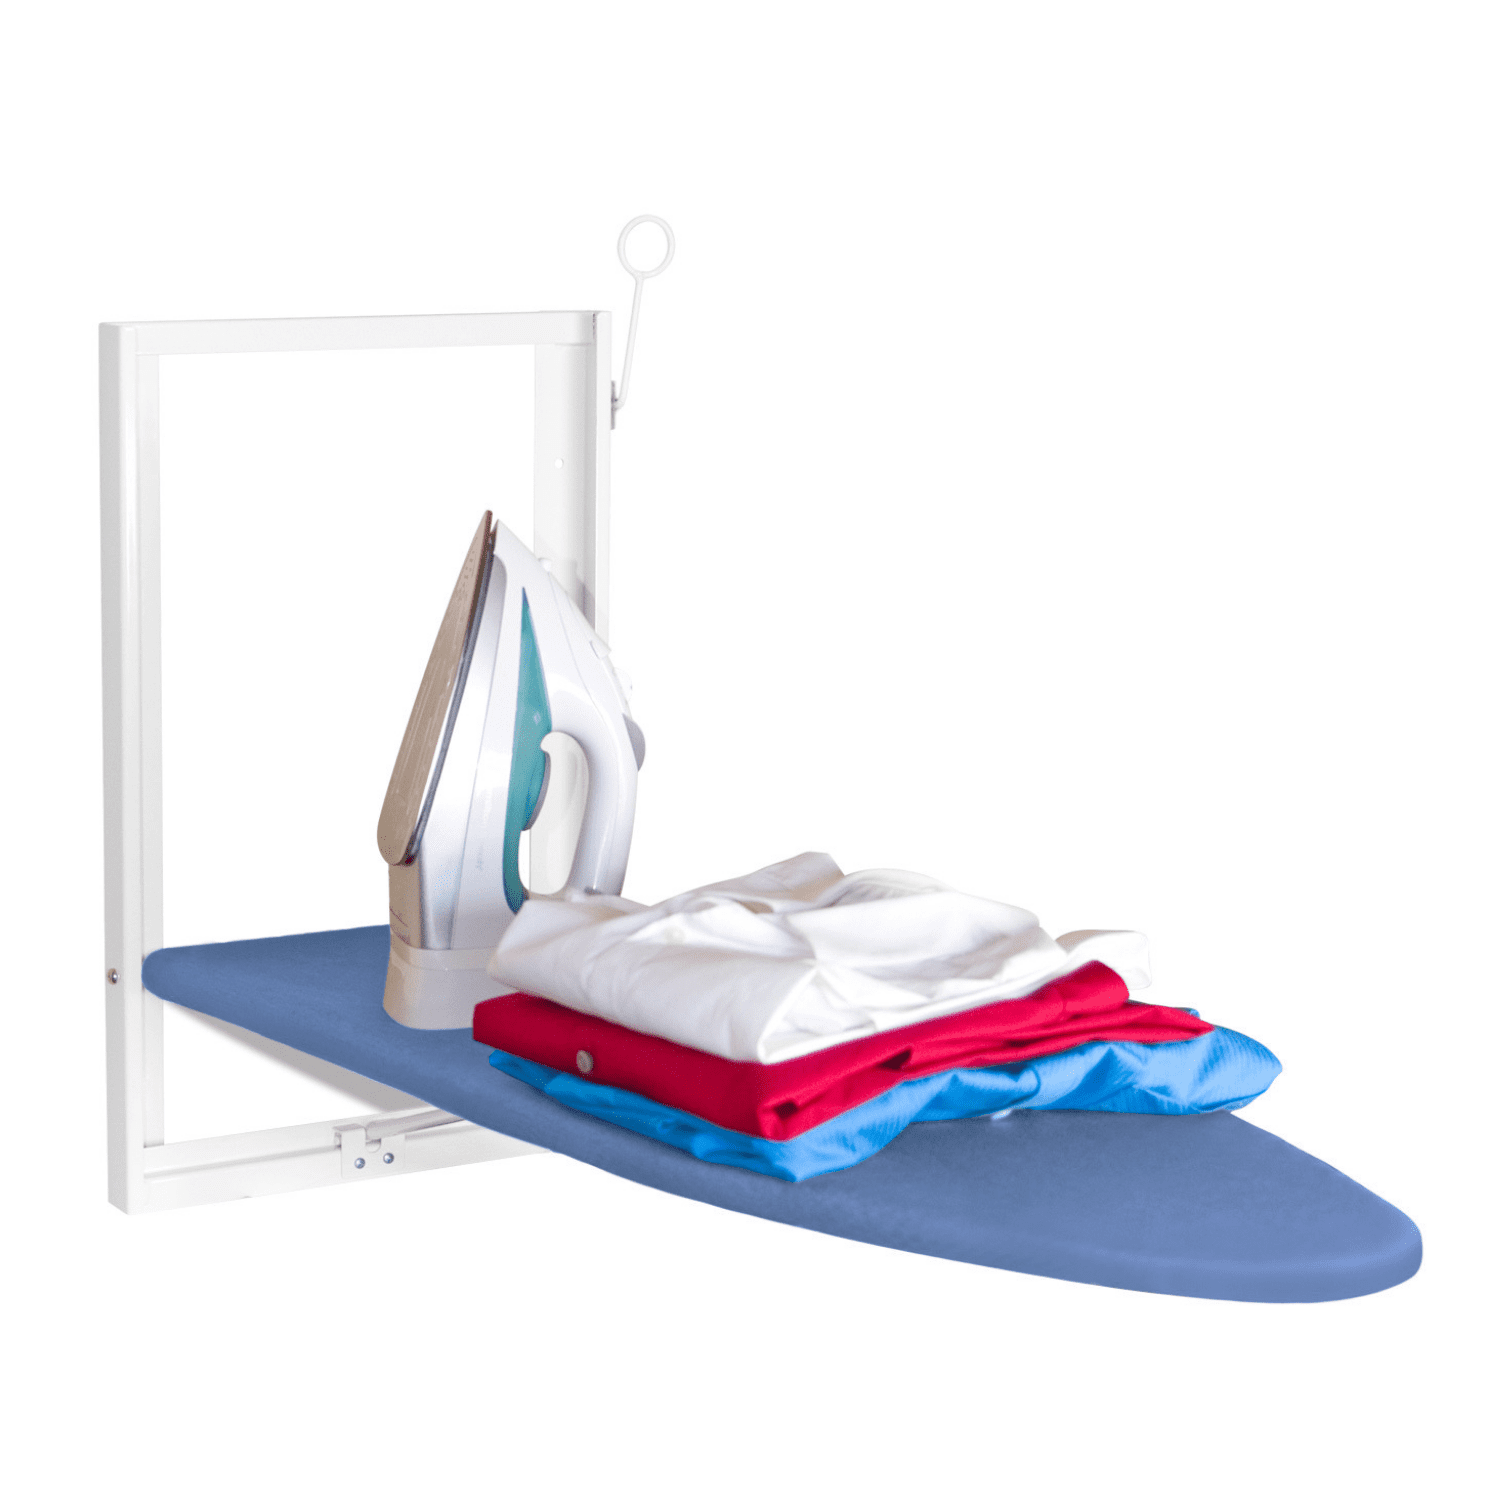 FUNKY FOLDABLE PORTABLE COMPACT TABLE TOP MINI IRONING LAUNDRY BOARD WITH COVER 